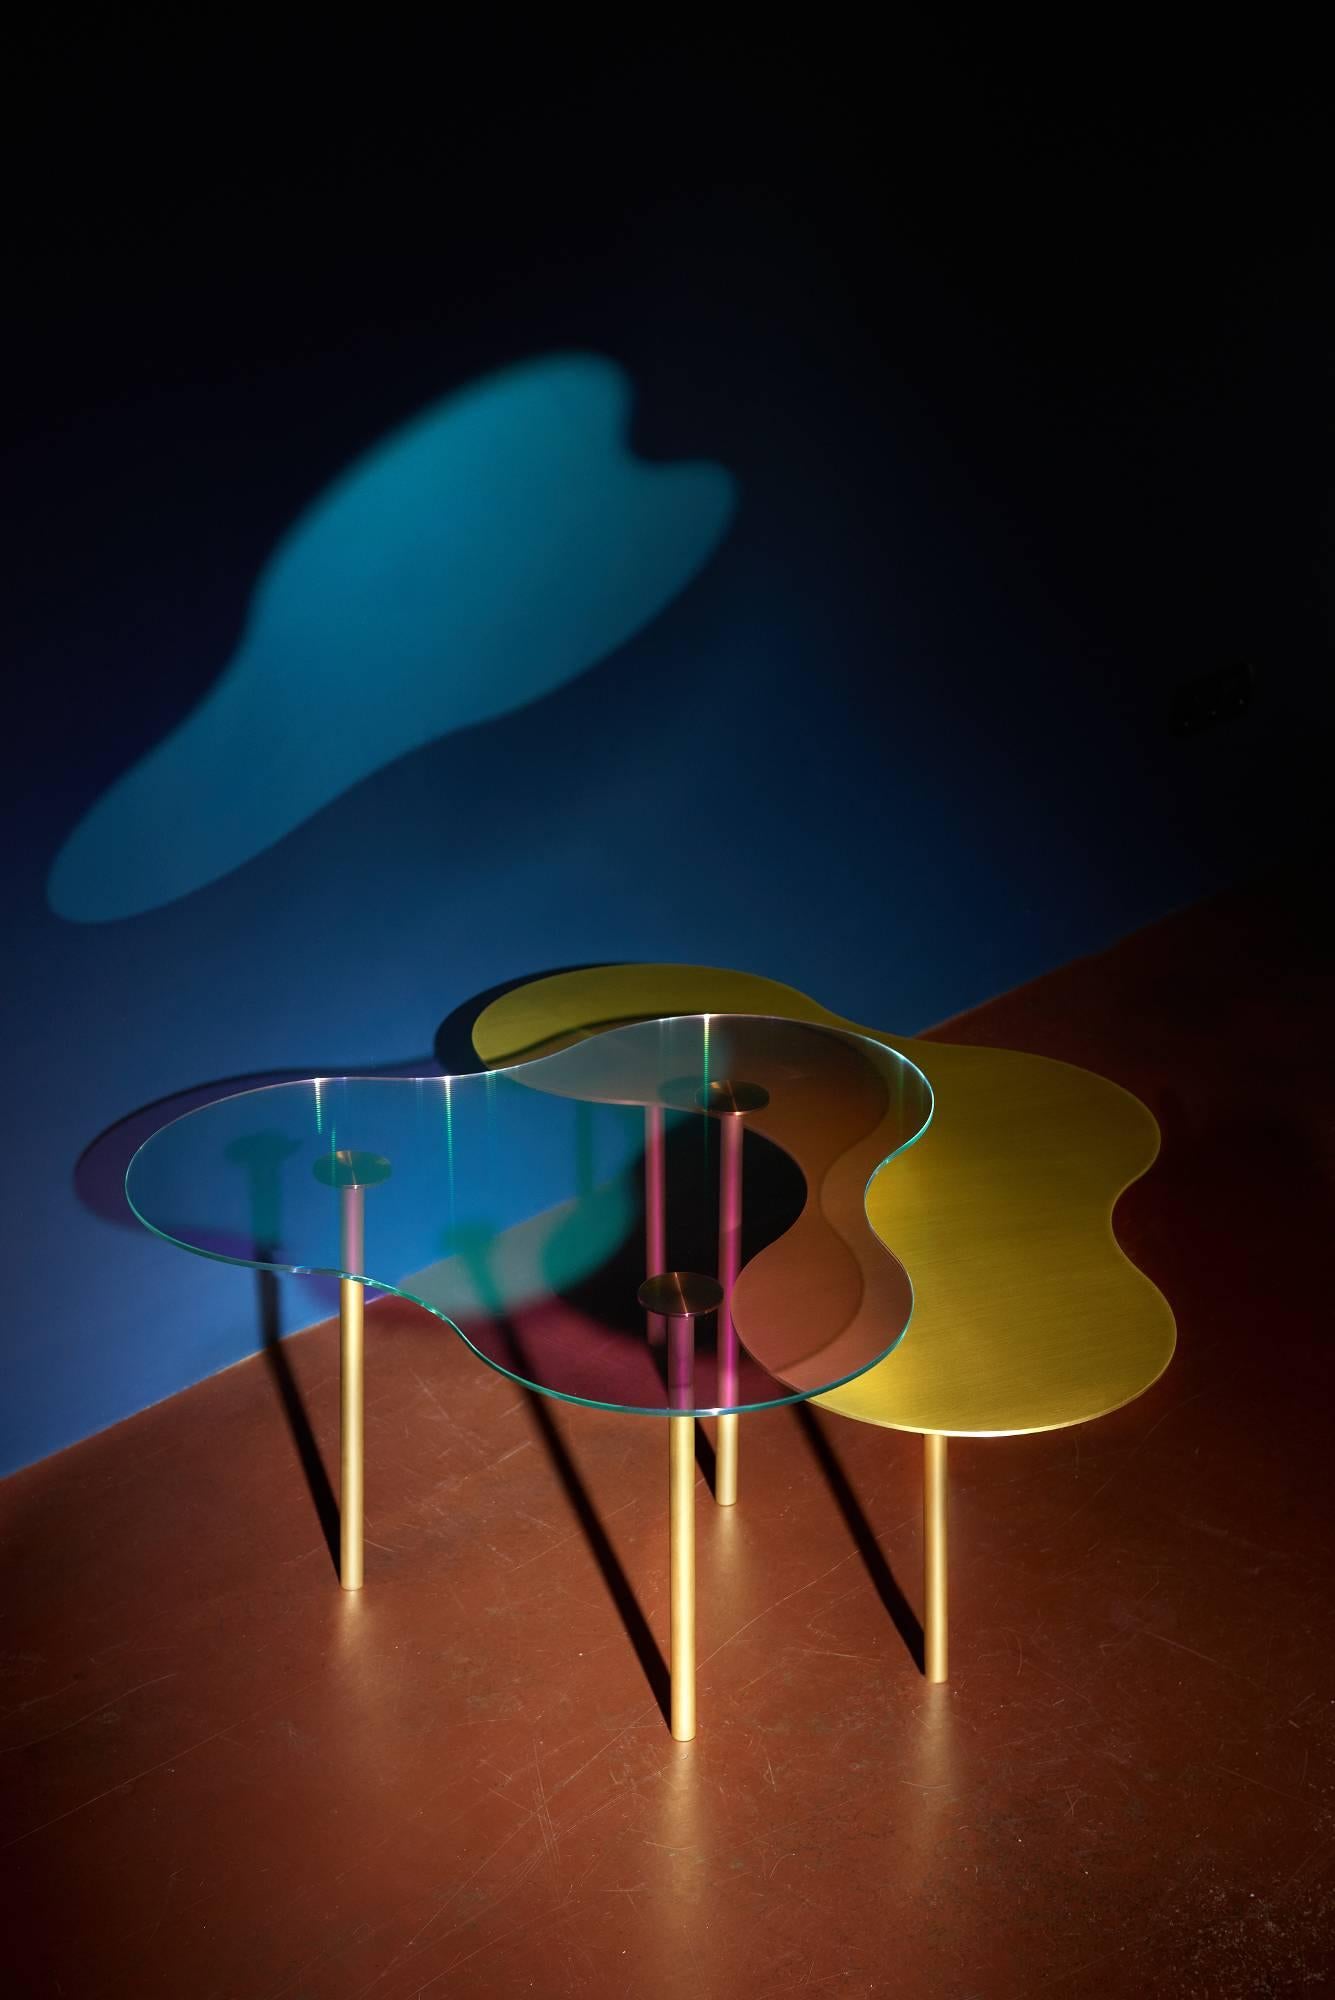 Glass/brass/marble coffee table Ensemble of 2 by Sebastian Scherer
Tables can be chosen among those dimensions:
CAMO 1 : 25 x 65 x 70 cm
CAMO 2: 35 x 53 x 96 cm
CAMO 3: 45 x 70 x 96 cm
The Camo tables are inspired by the camou?age pattern, which is